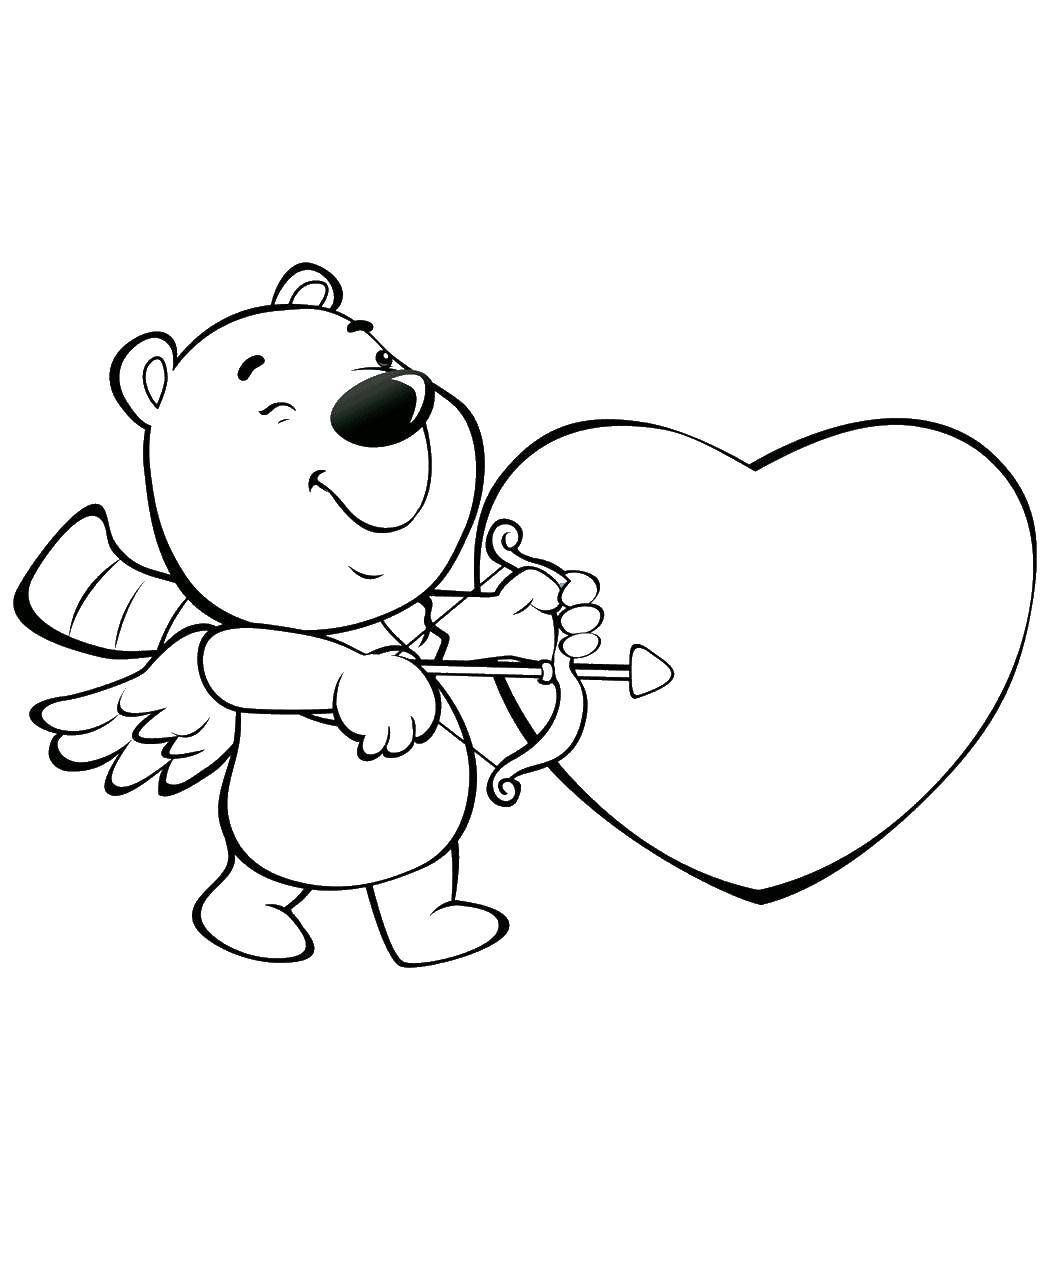 Coloring Cupid and heart. Category Hearts. Tags:  heart, love, Cupid.